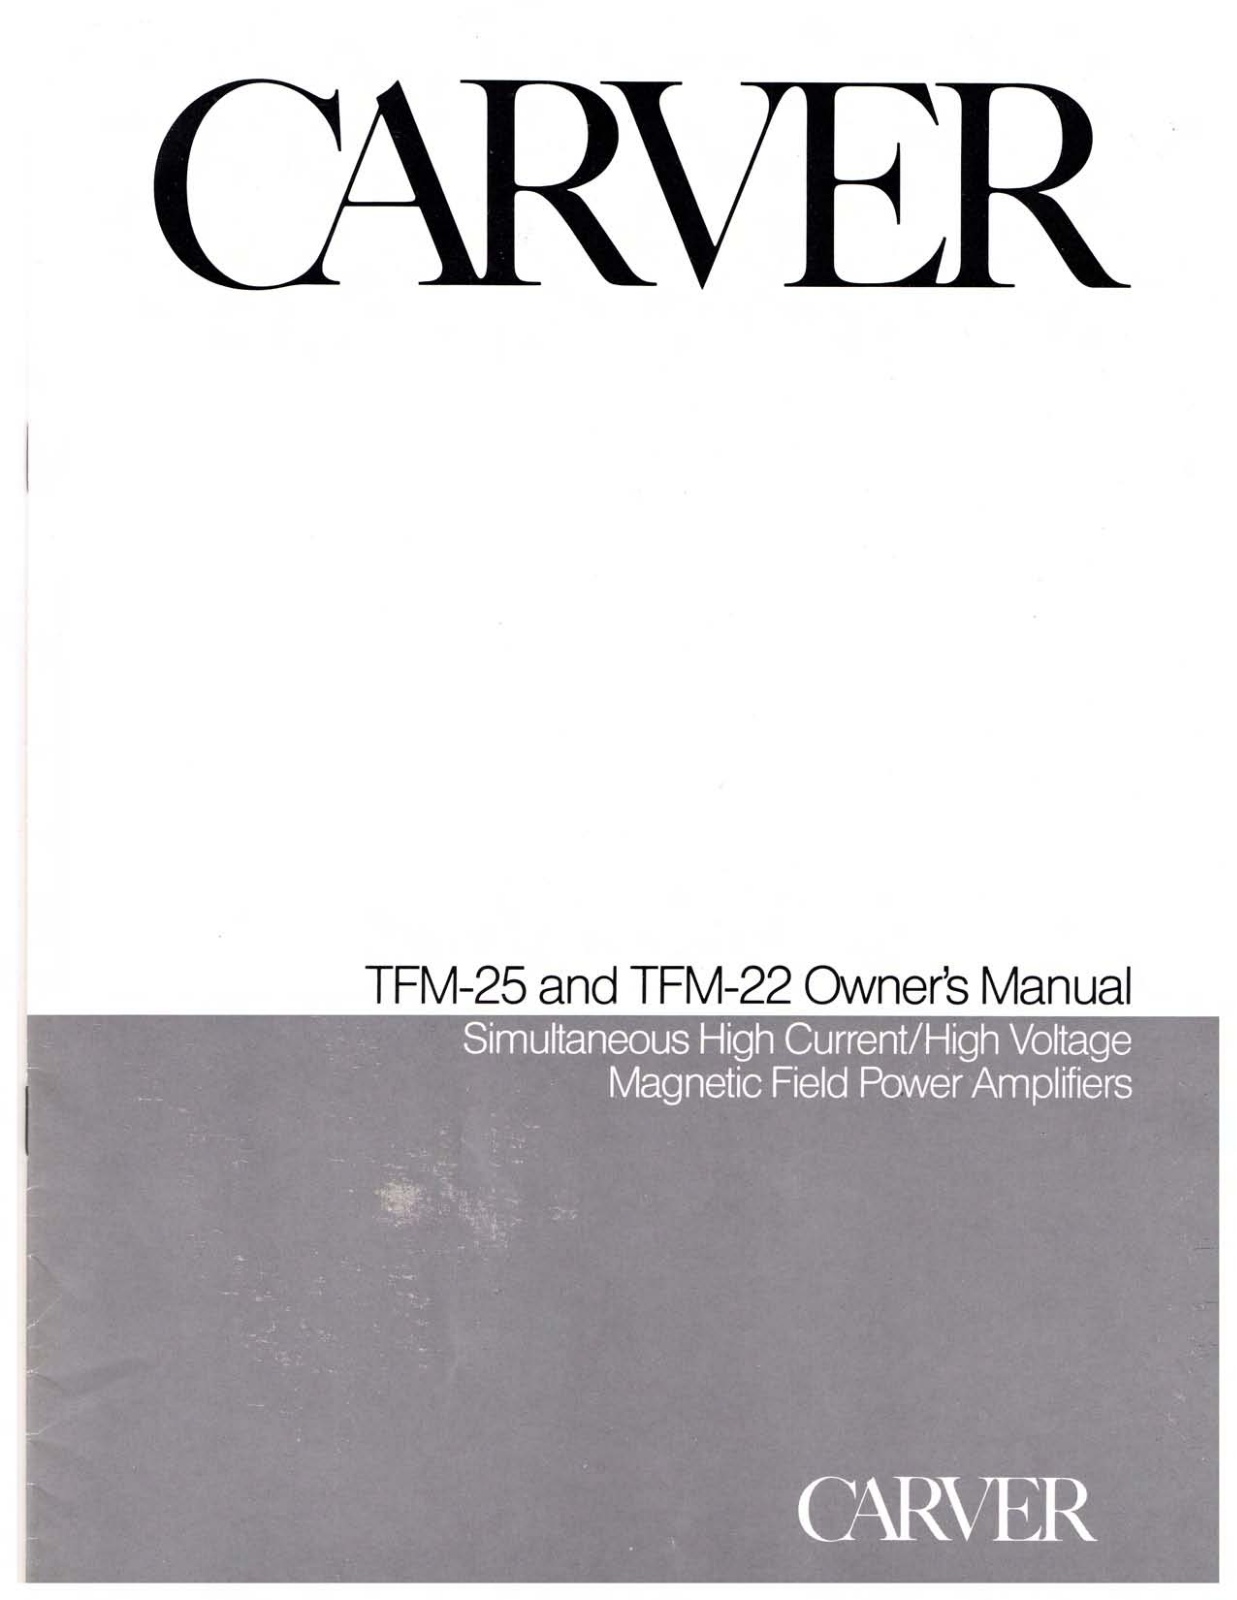 Carver TFM-22, TFM-25 Owners manual